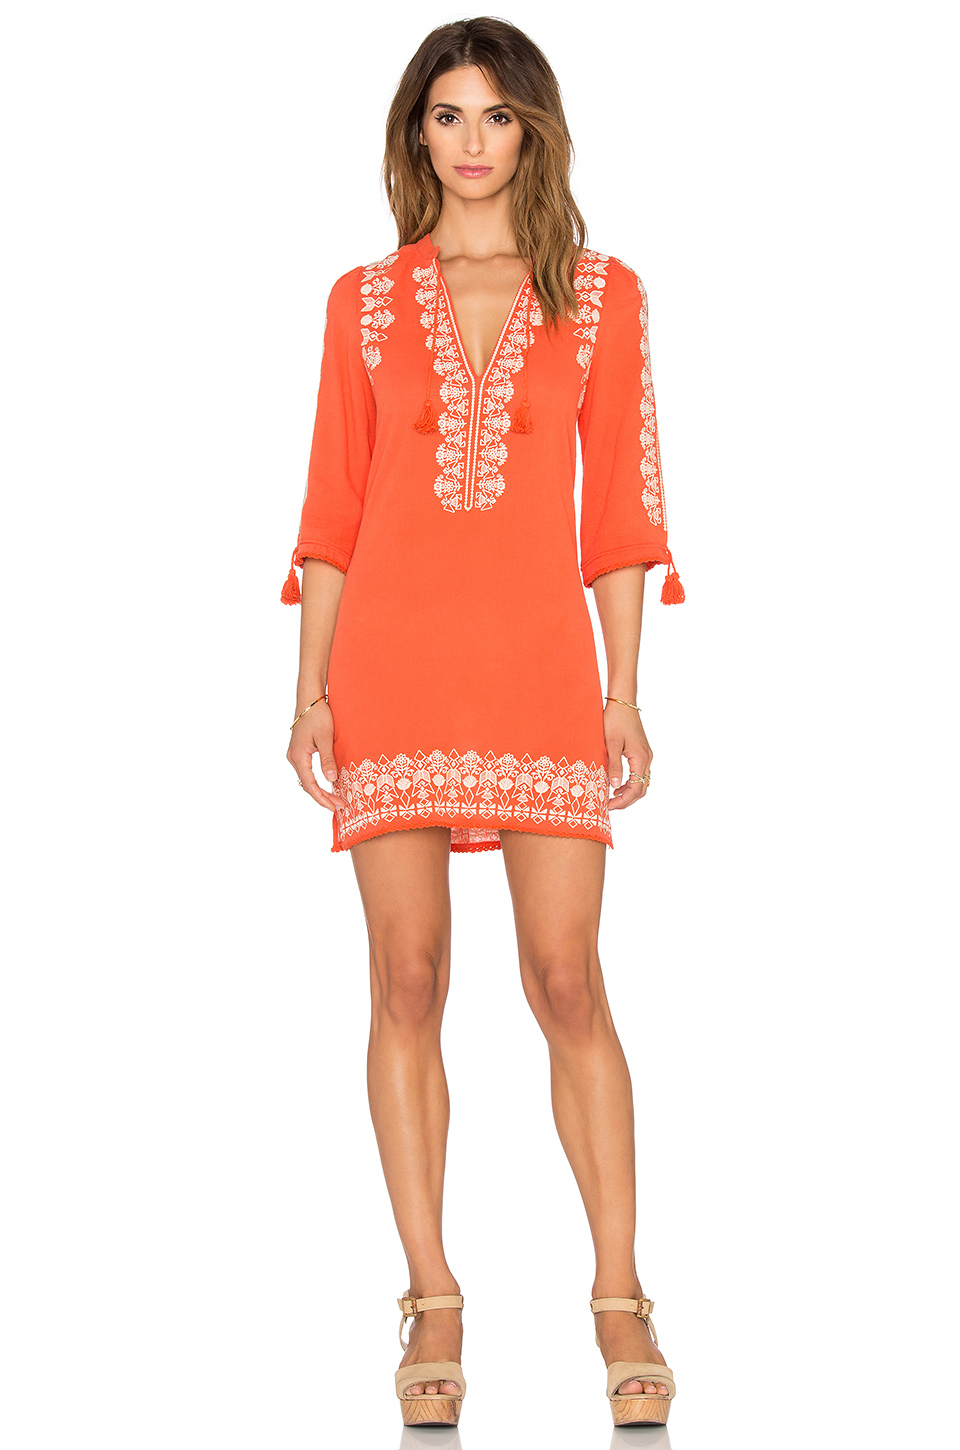 Lyst - Spell & The Gypsy Collective Santorini Embroidered Tunic Dress ...